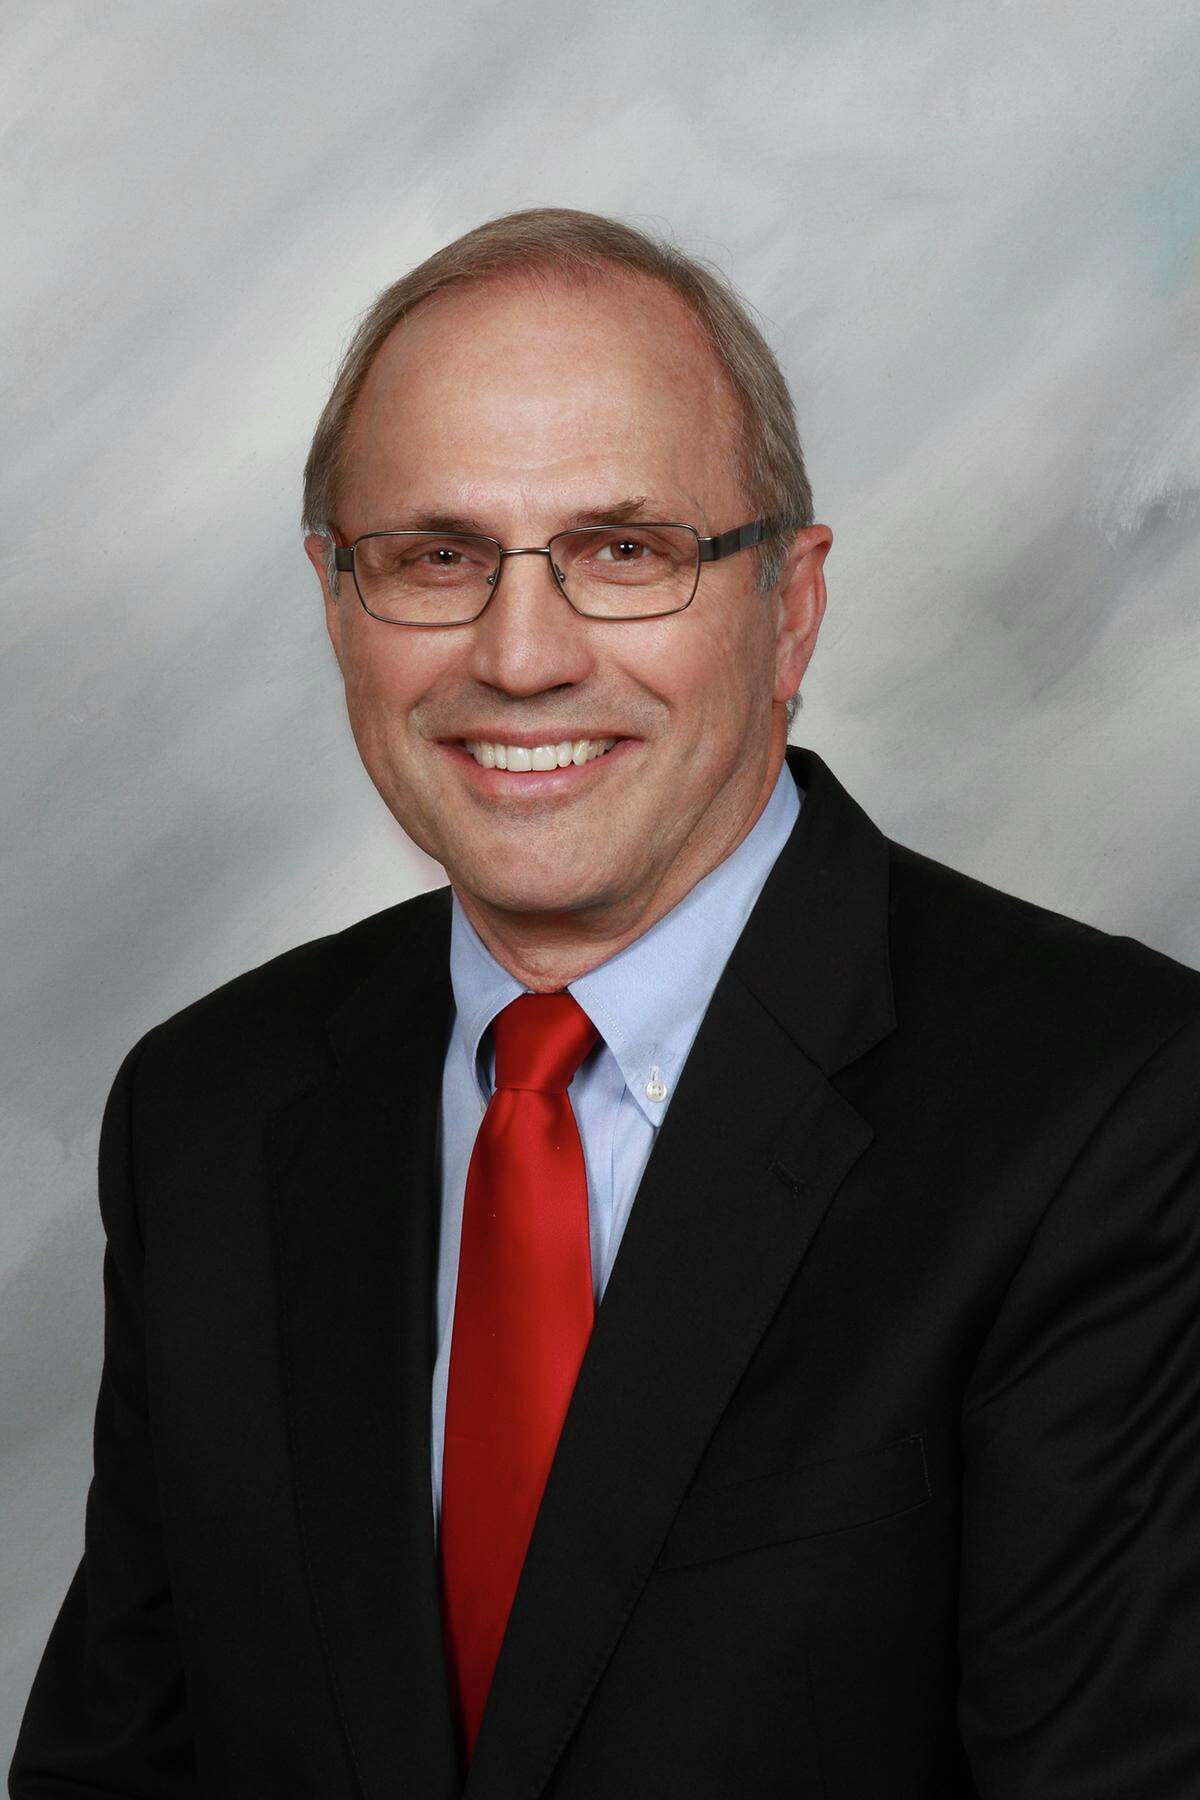 Don Norrell, the president and general manager of The Woodlands Township, had announced he was retiring effective April 30, 2020. However, due to the COVID-19 pandemic, Norrell delayed his retirement not once, but twice. He has been with the township since 2006 and will remain as a paid consultant to the township after his retirement until June 20, 2021.